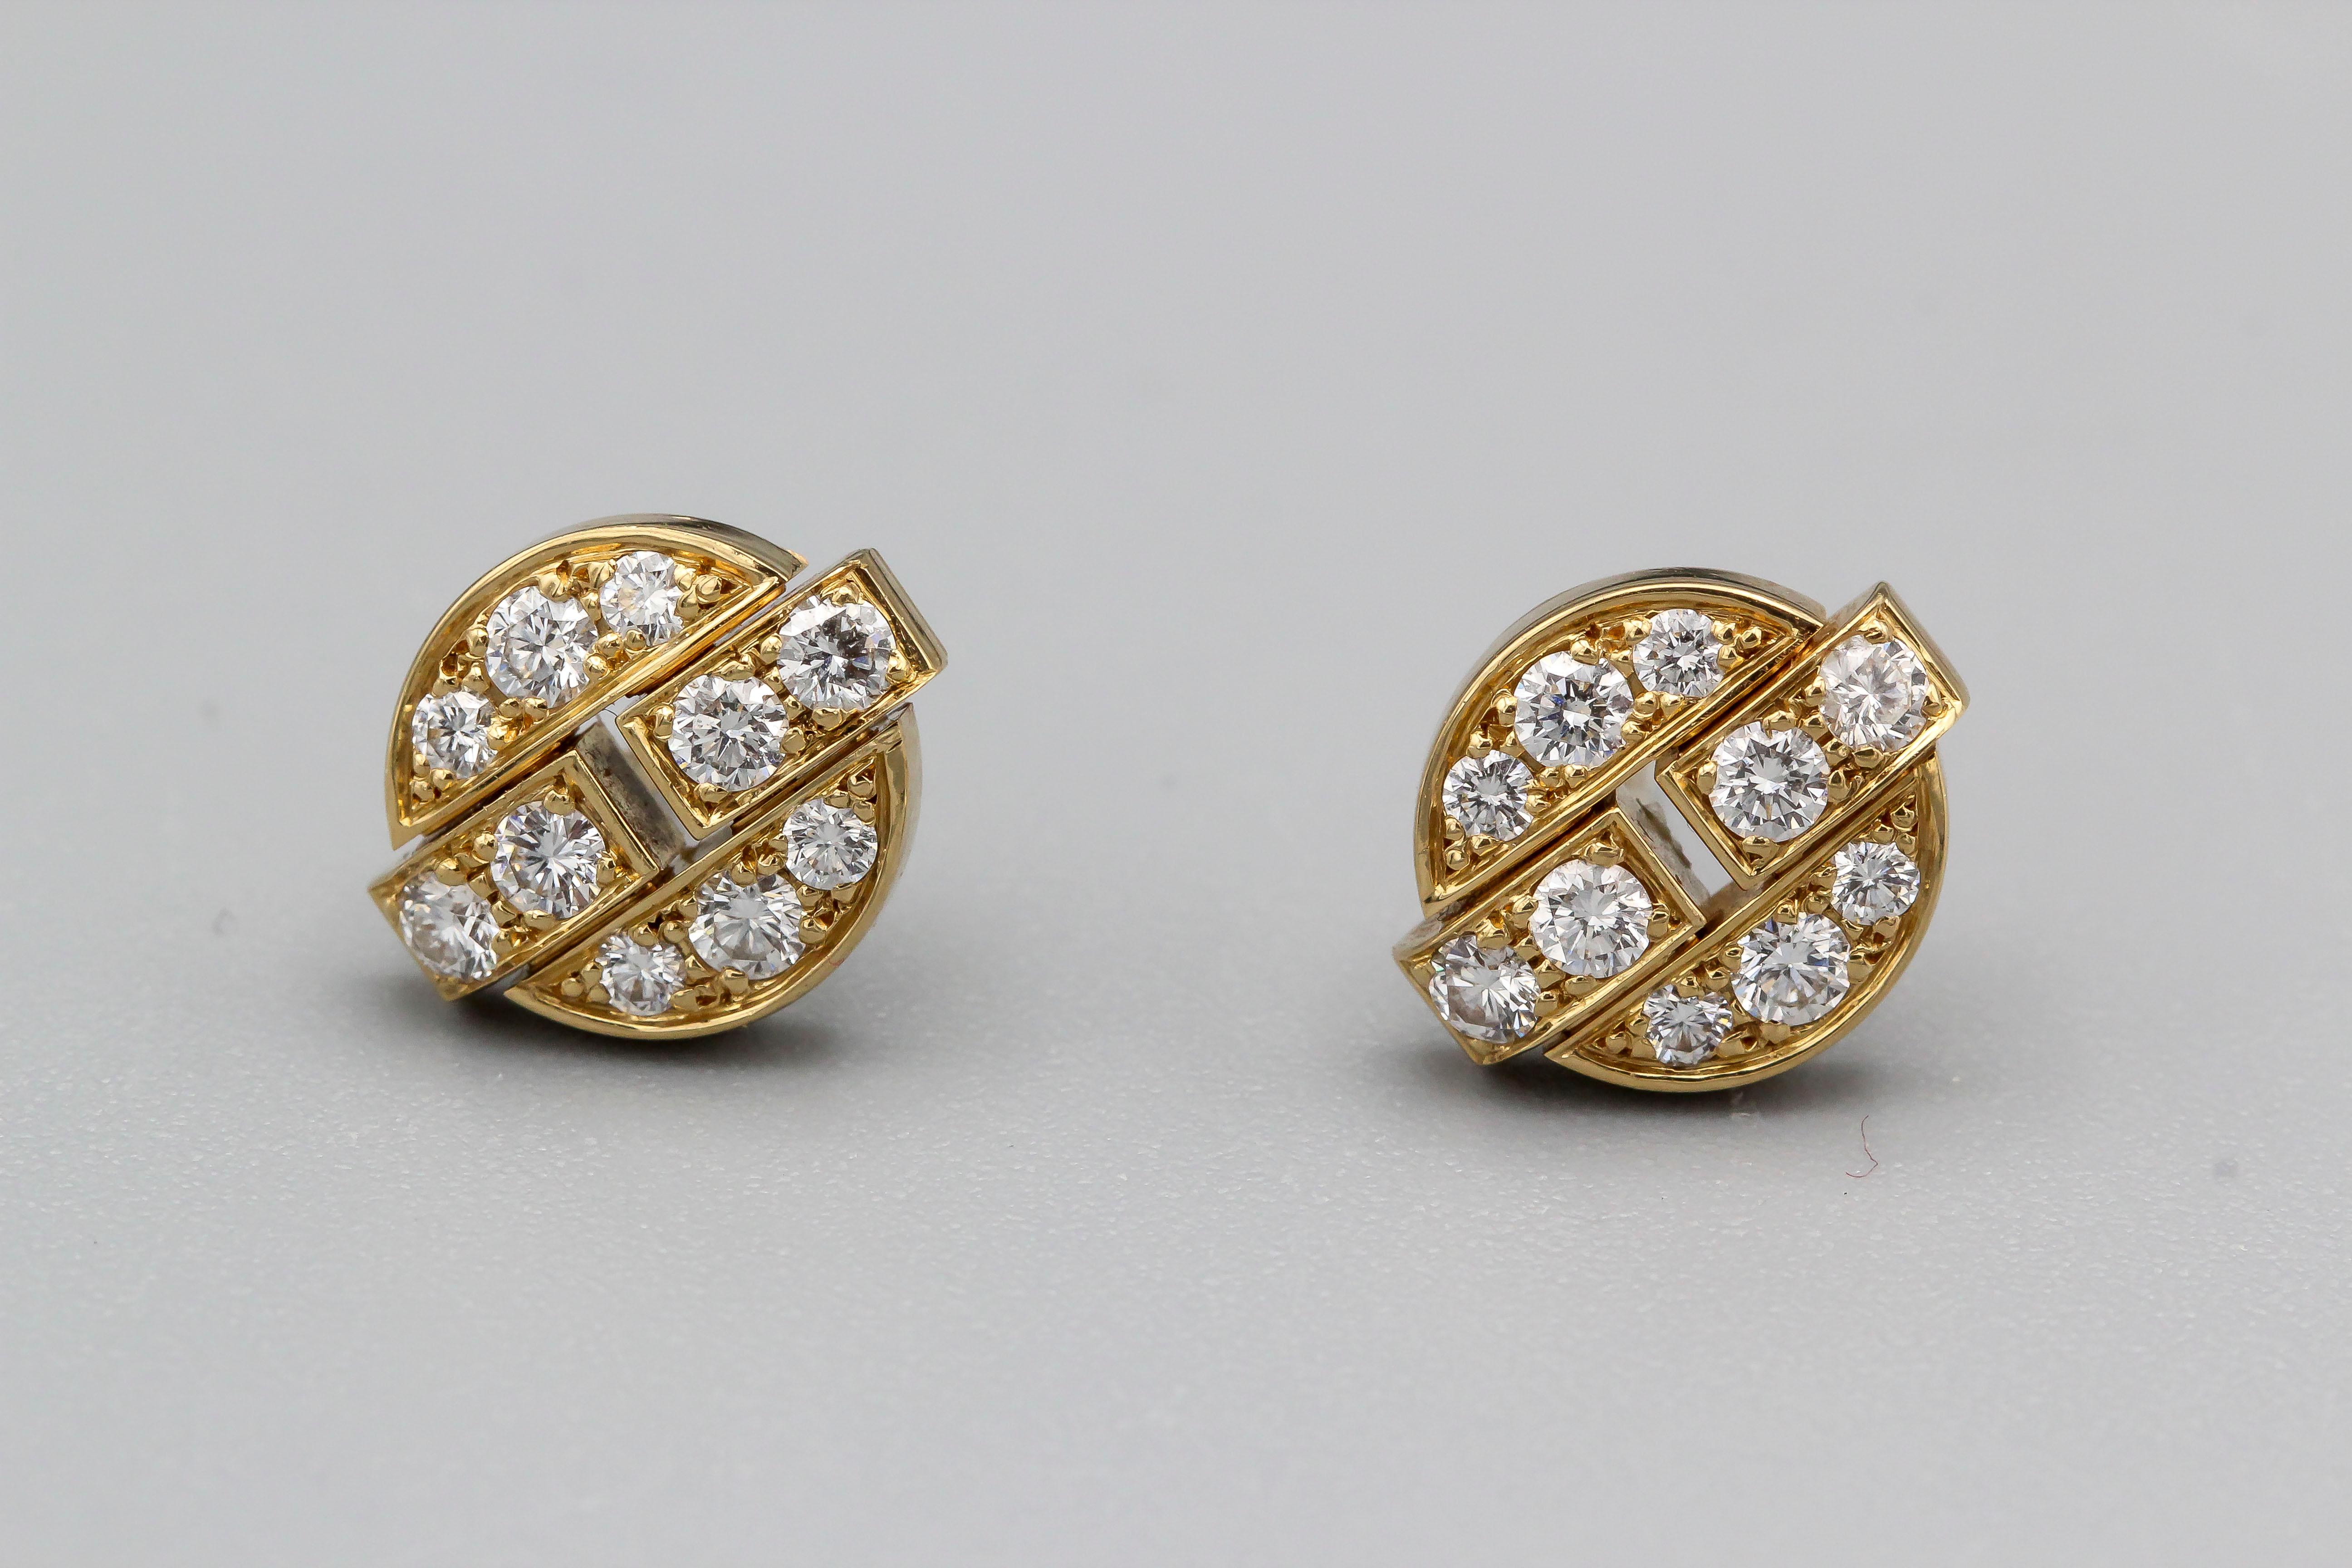 Fine pair of diamond and 18K yellow gold earrings from the Himalia collection, by Cartier, circa 2006-7. They feature high grade round brilliant cut diamonds and are designed with stud posts. Beautifully made and very elegant for any occasion. With